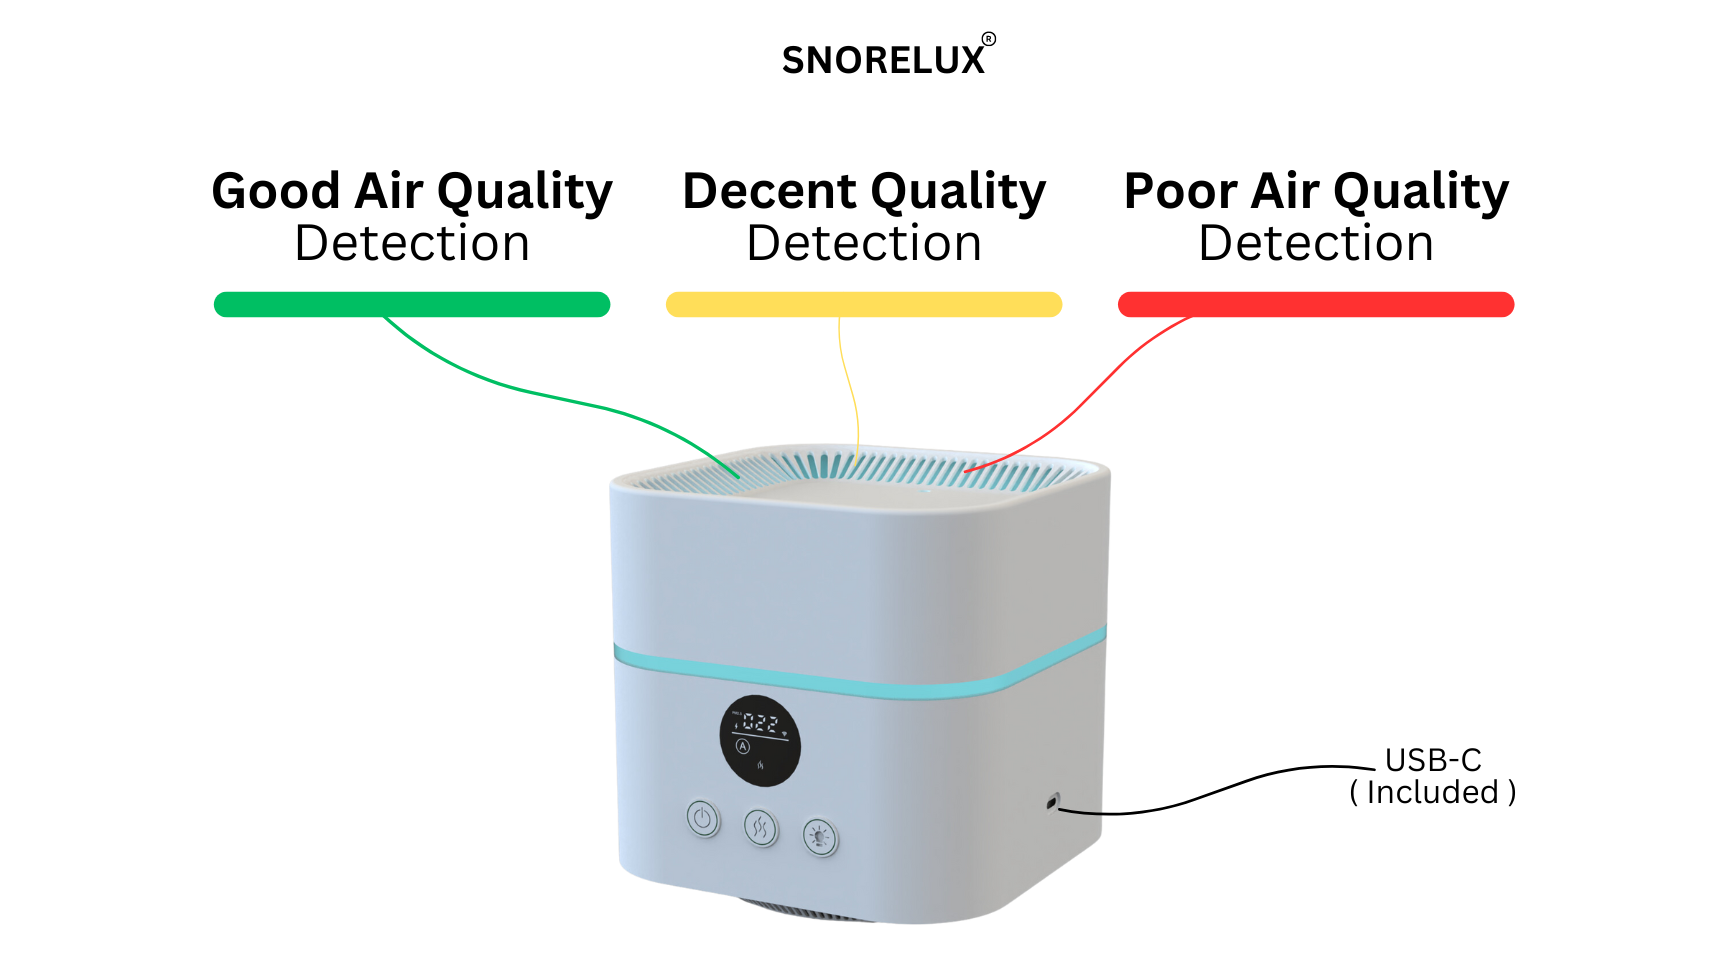 Bedroom Air-Purifier &amp; Humidifier